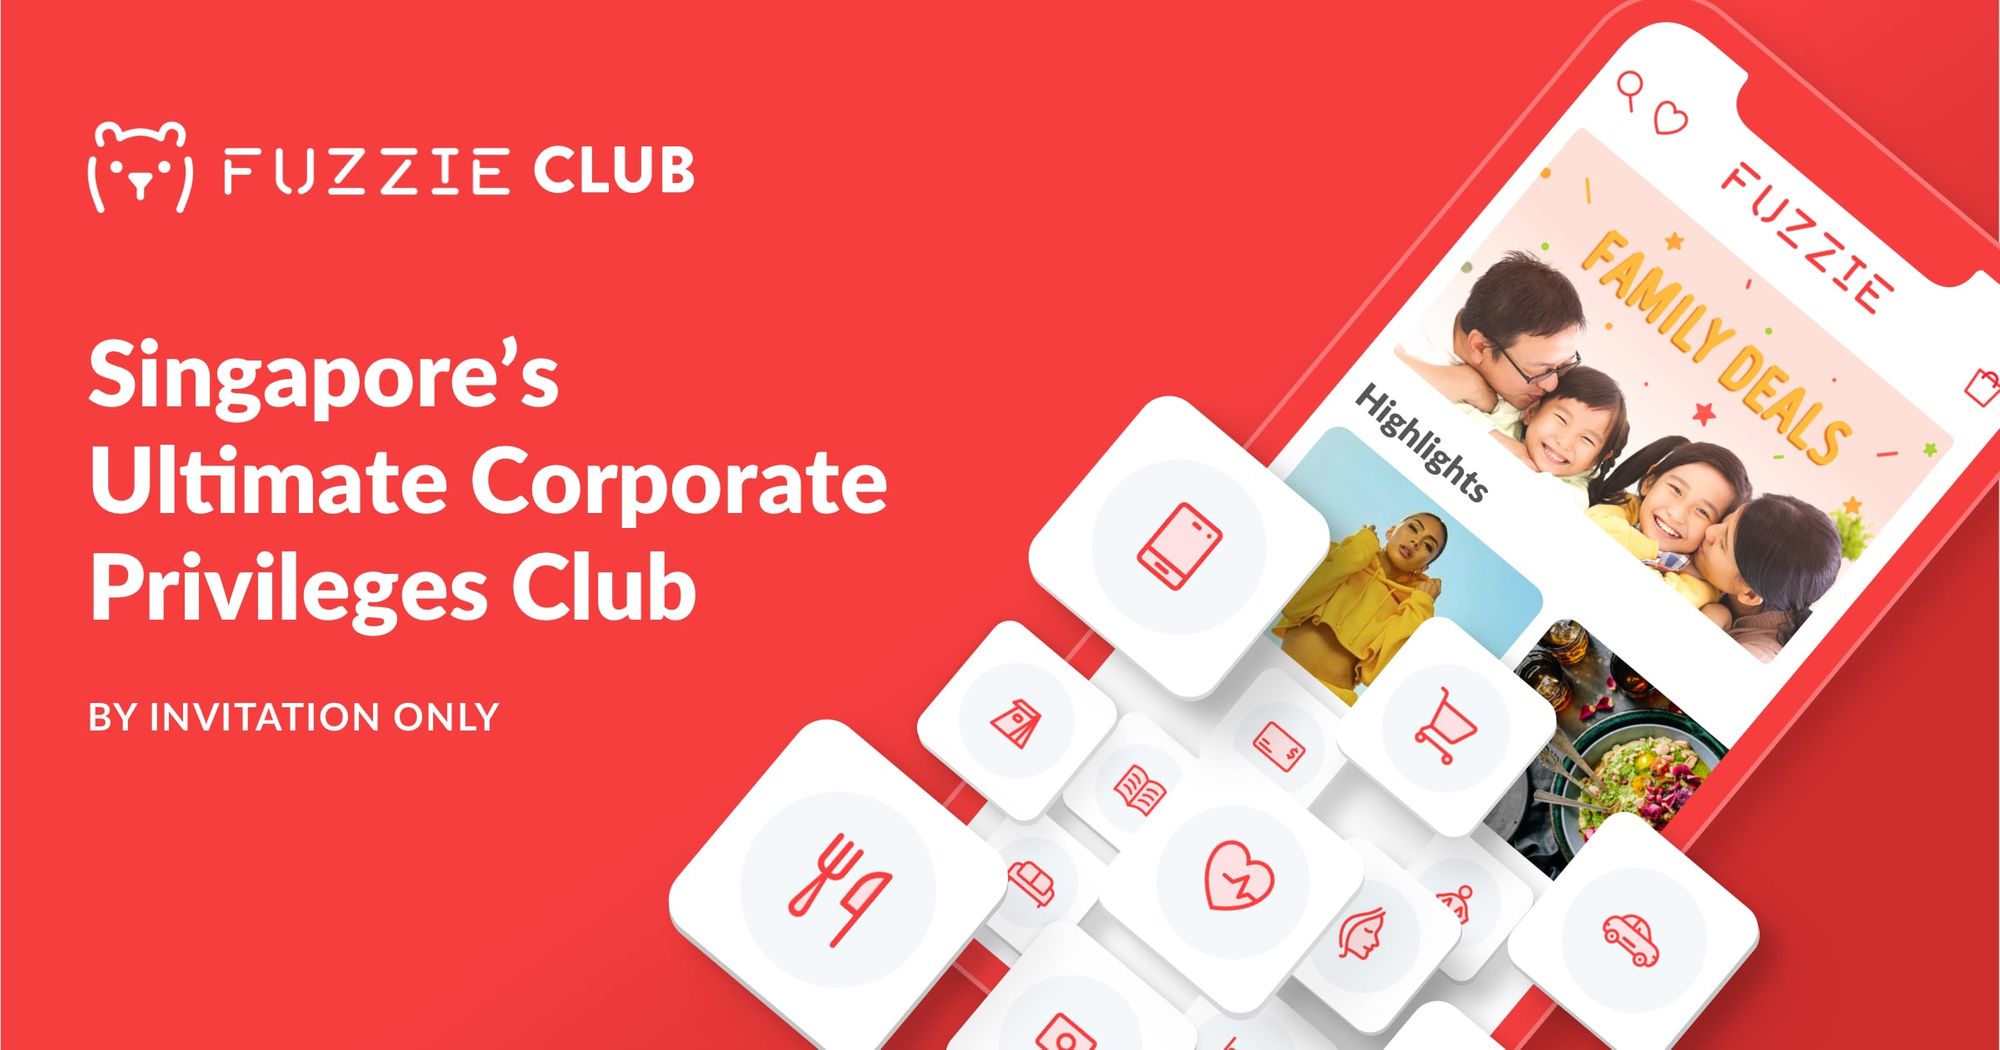 How to get your free Fuzzie Corporate Club membership